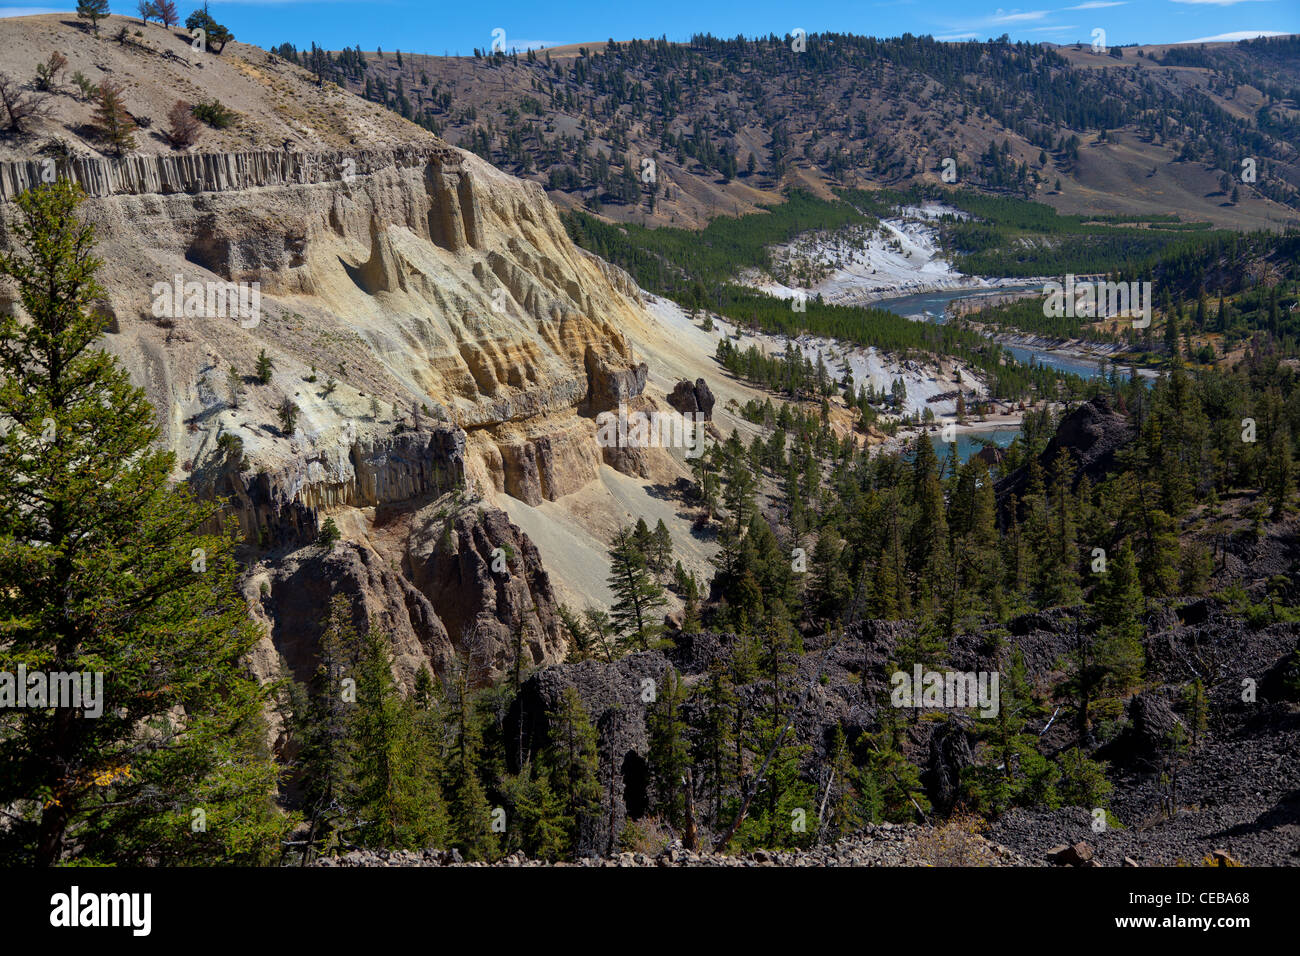 The Narrows of the Yellowstone are located just north of Tower Fall along the Grand Loop Road.  The layers in the cliff face are from basaltic flows occuring at two different times, separated by fluvial deposits. Stock Photo